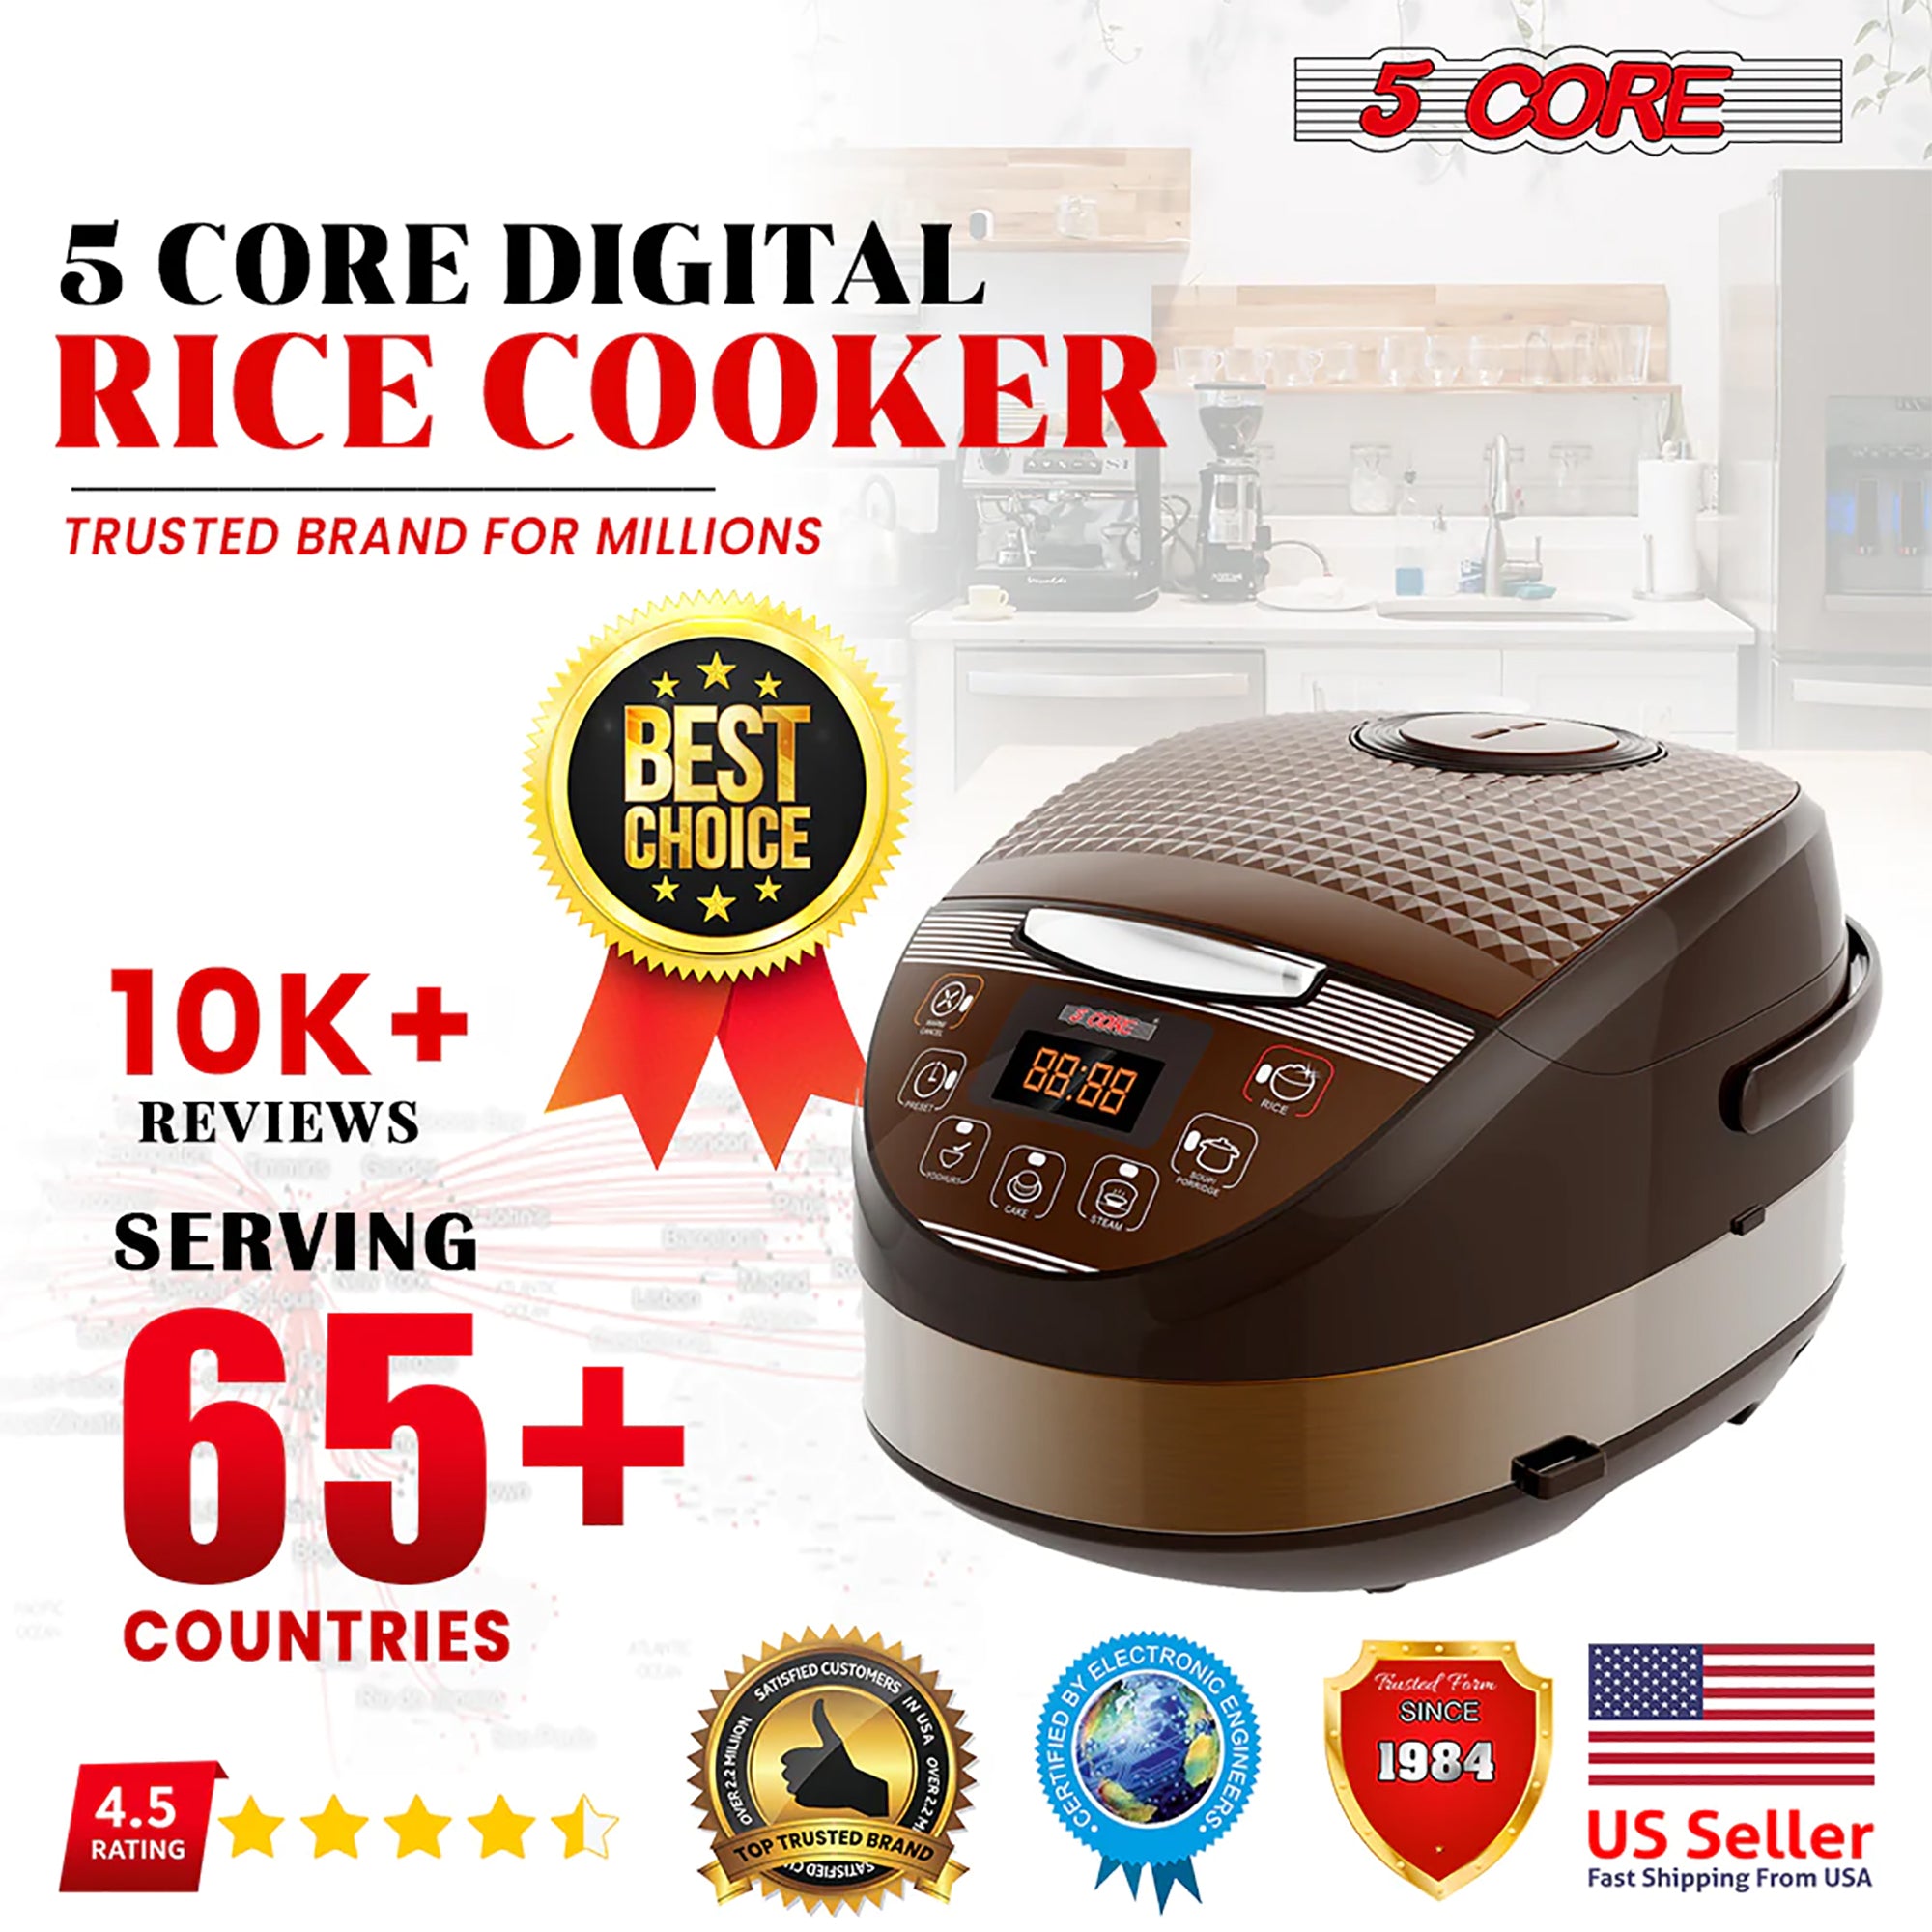 Trust 5 Core's Asian Rice Cooker, a culinary gem since 1984.